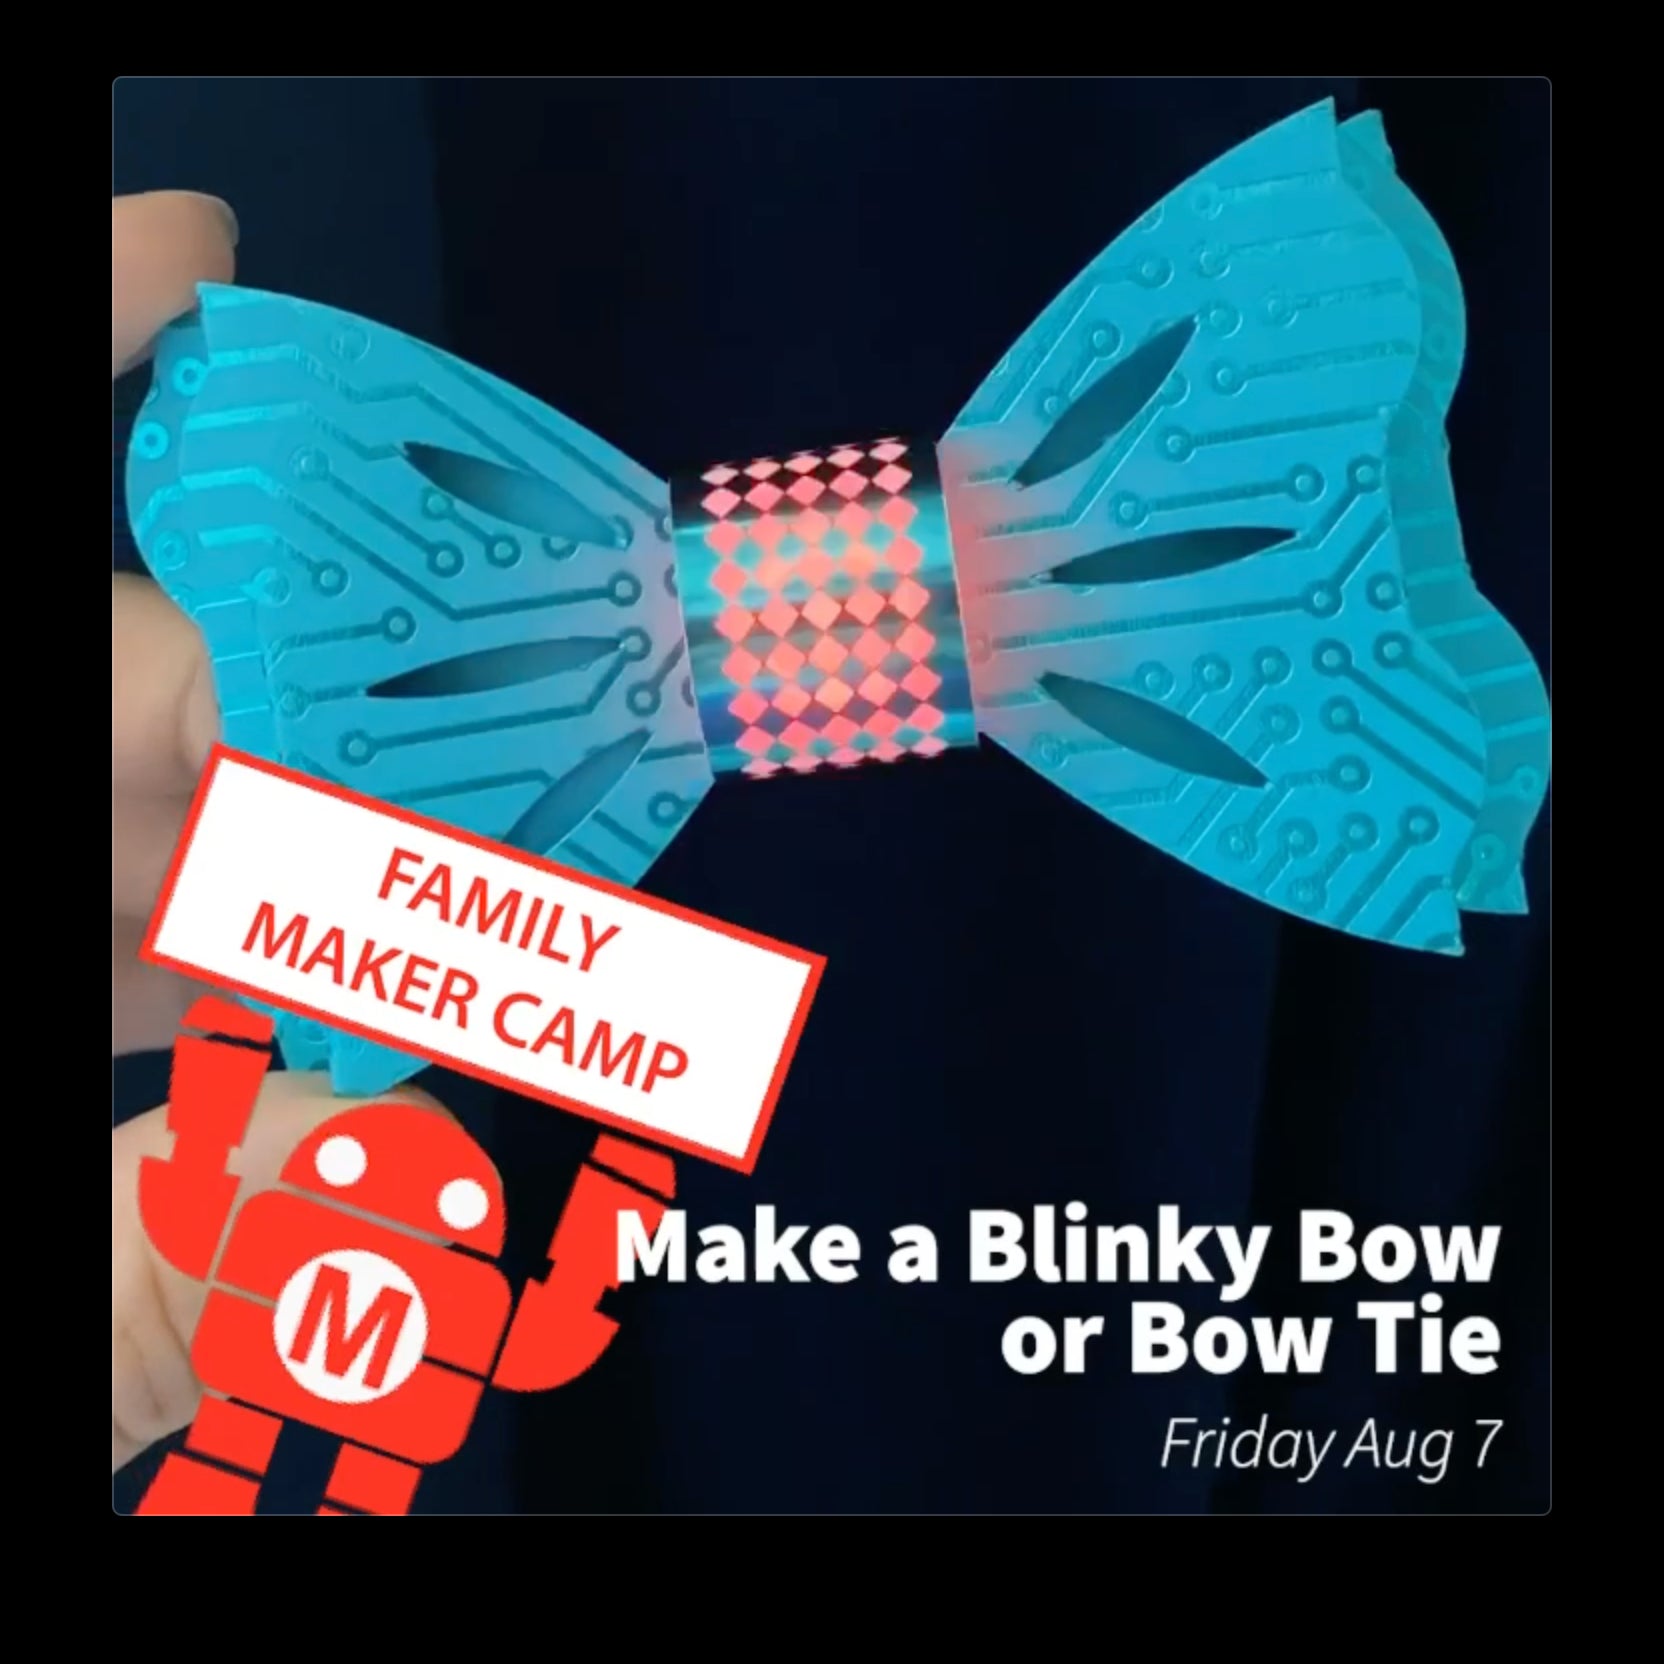 Maker Camp Live! Blinky Bows & Bow Ties